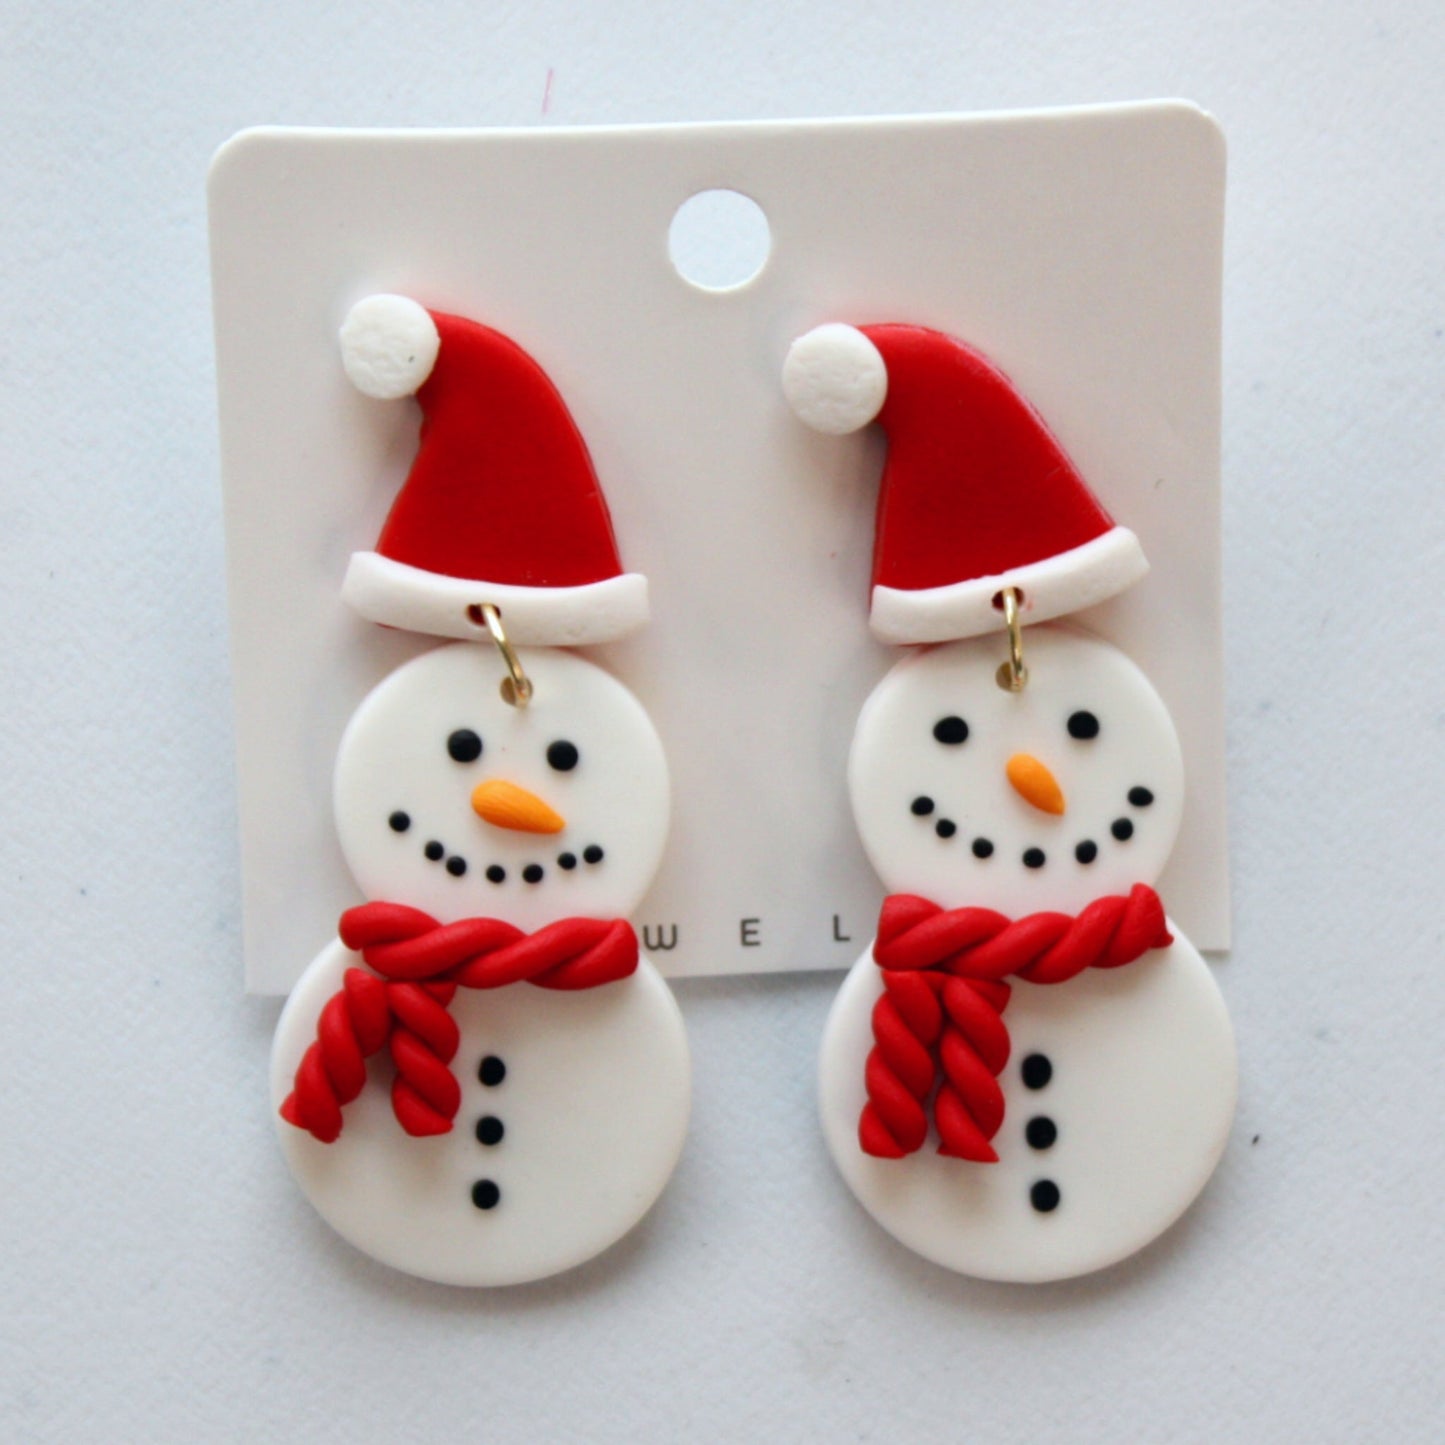 Christmas Snowman Earrings - Made in the USA